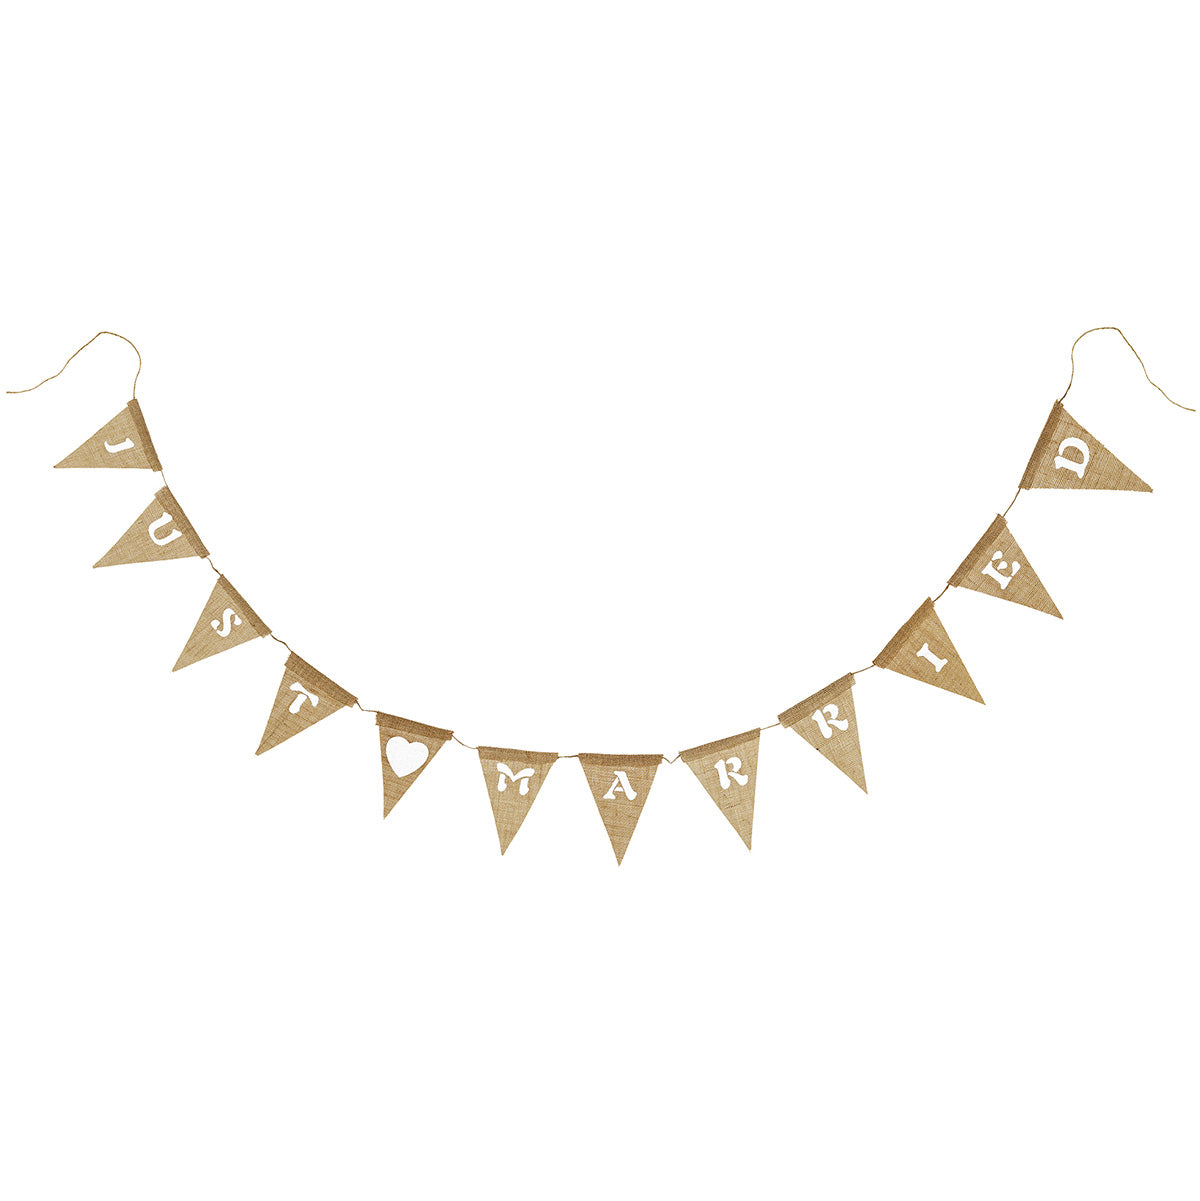 Just Married' Burlap Pennant Banner